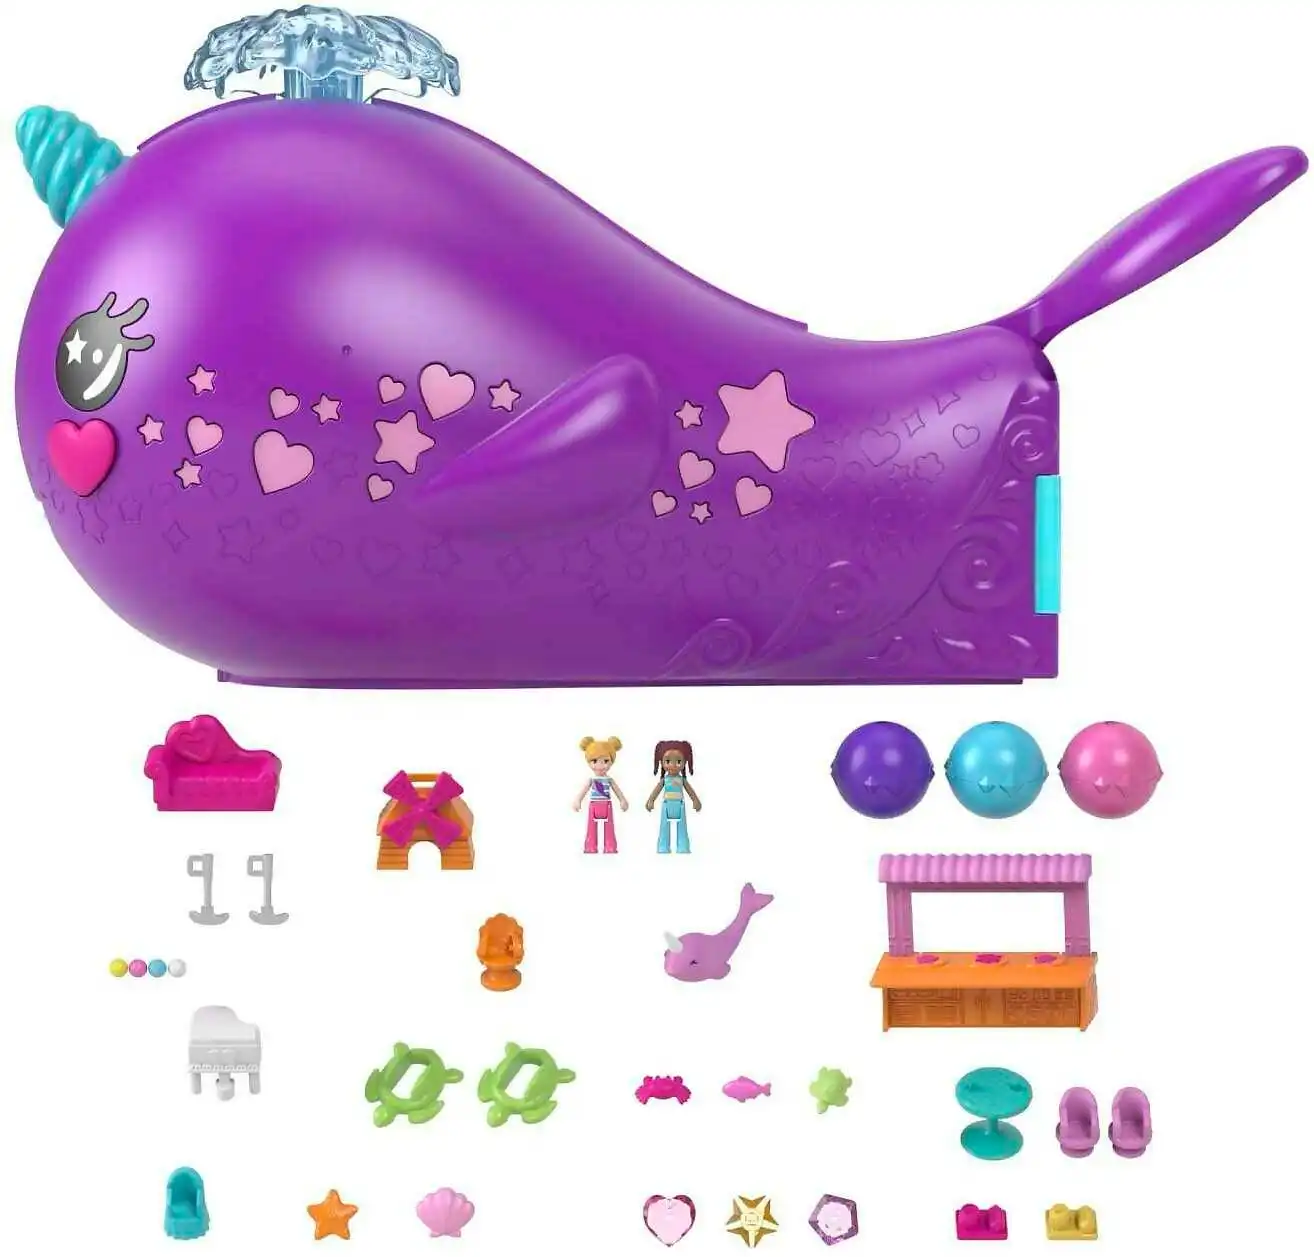 Polly Pocket - Sparkle Cove Adventure Narwhal Adventurer Boat Playset With 2 Micro Dolls & 13 Accessories - Mattel